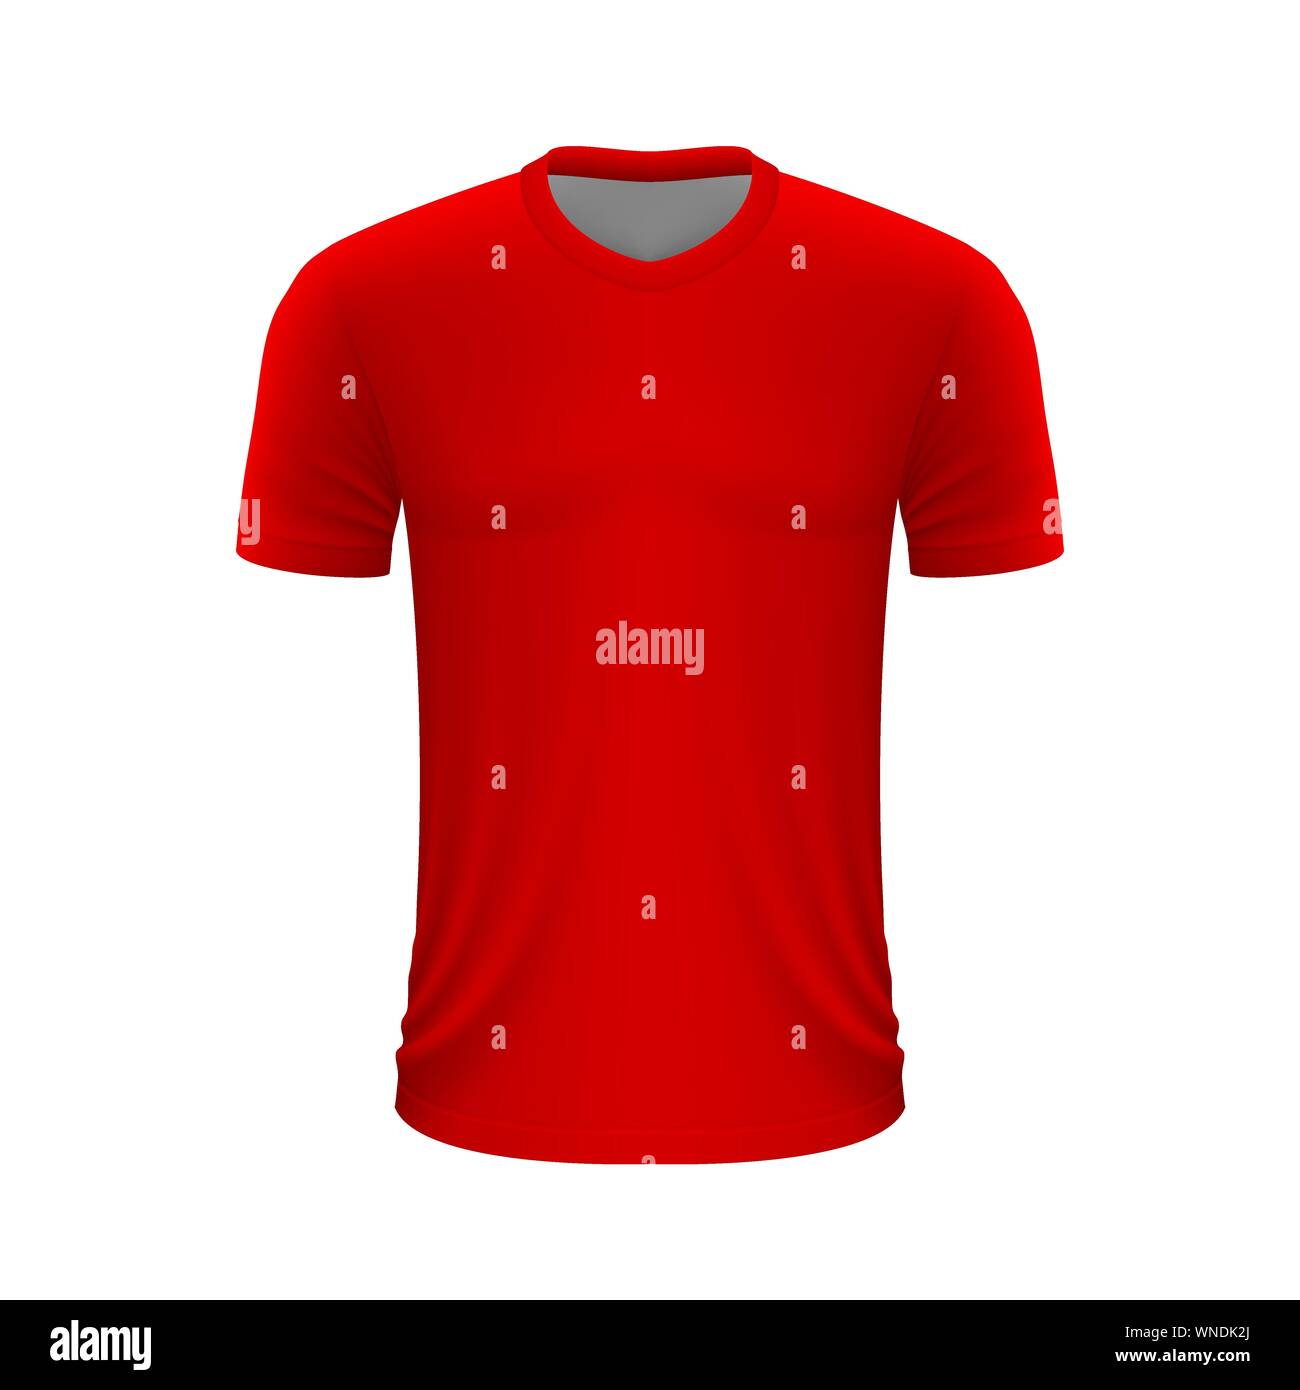 Blank Football Jersey Clip Art  Clothing design sketches, Sport